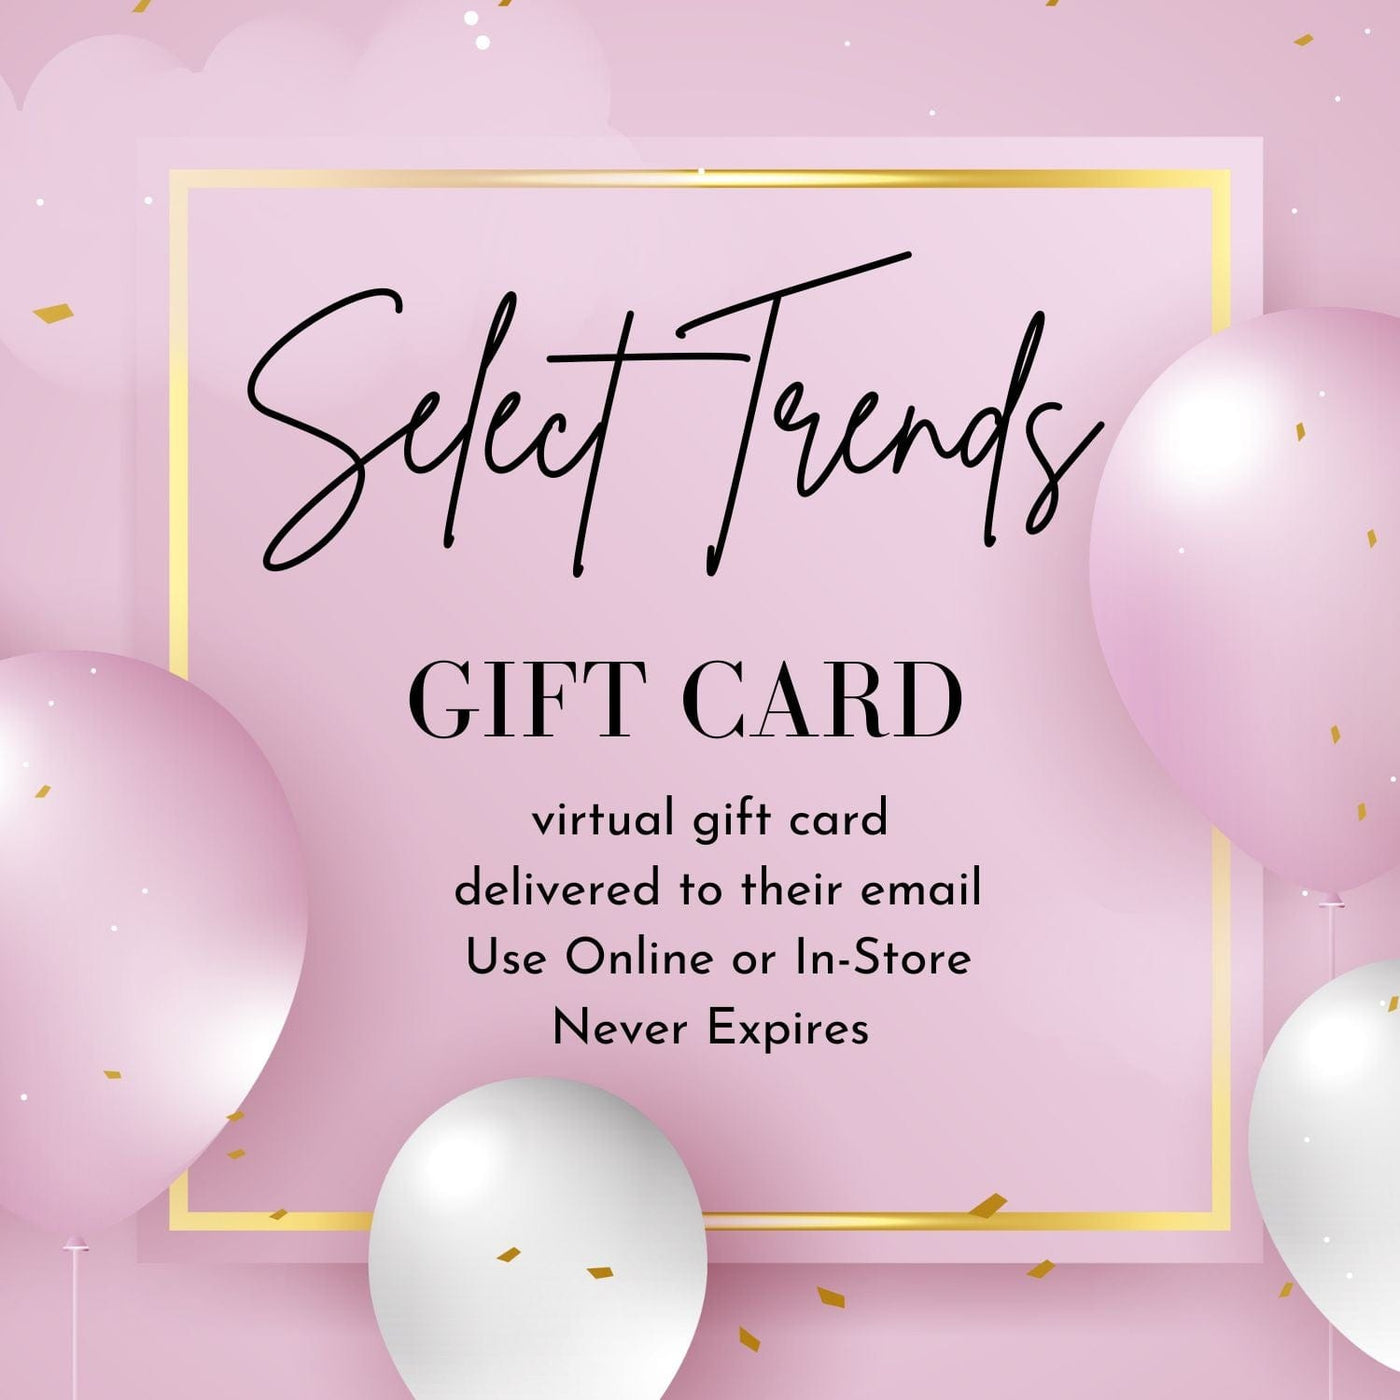 Select Trends Boutique Virtual Gift Card